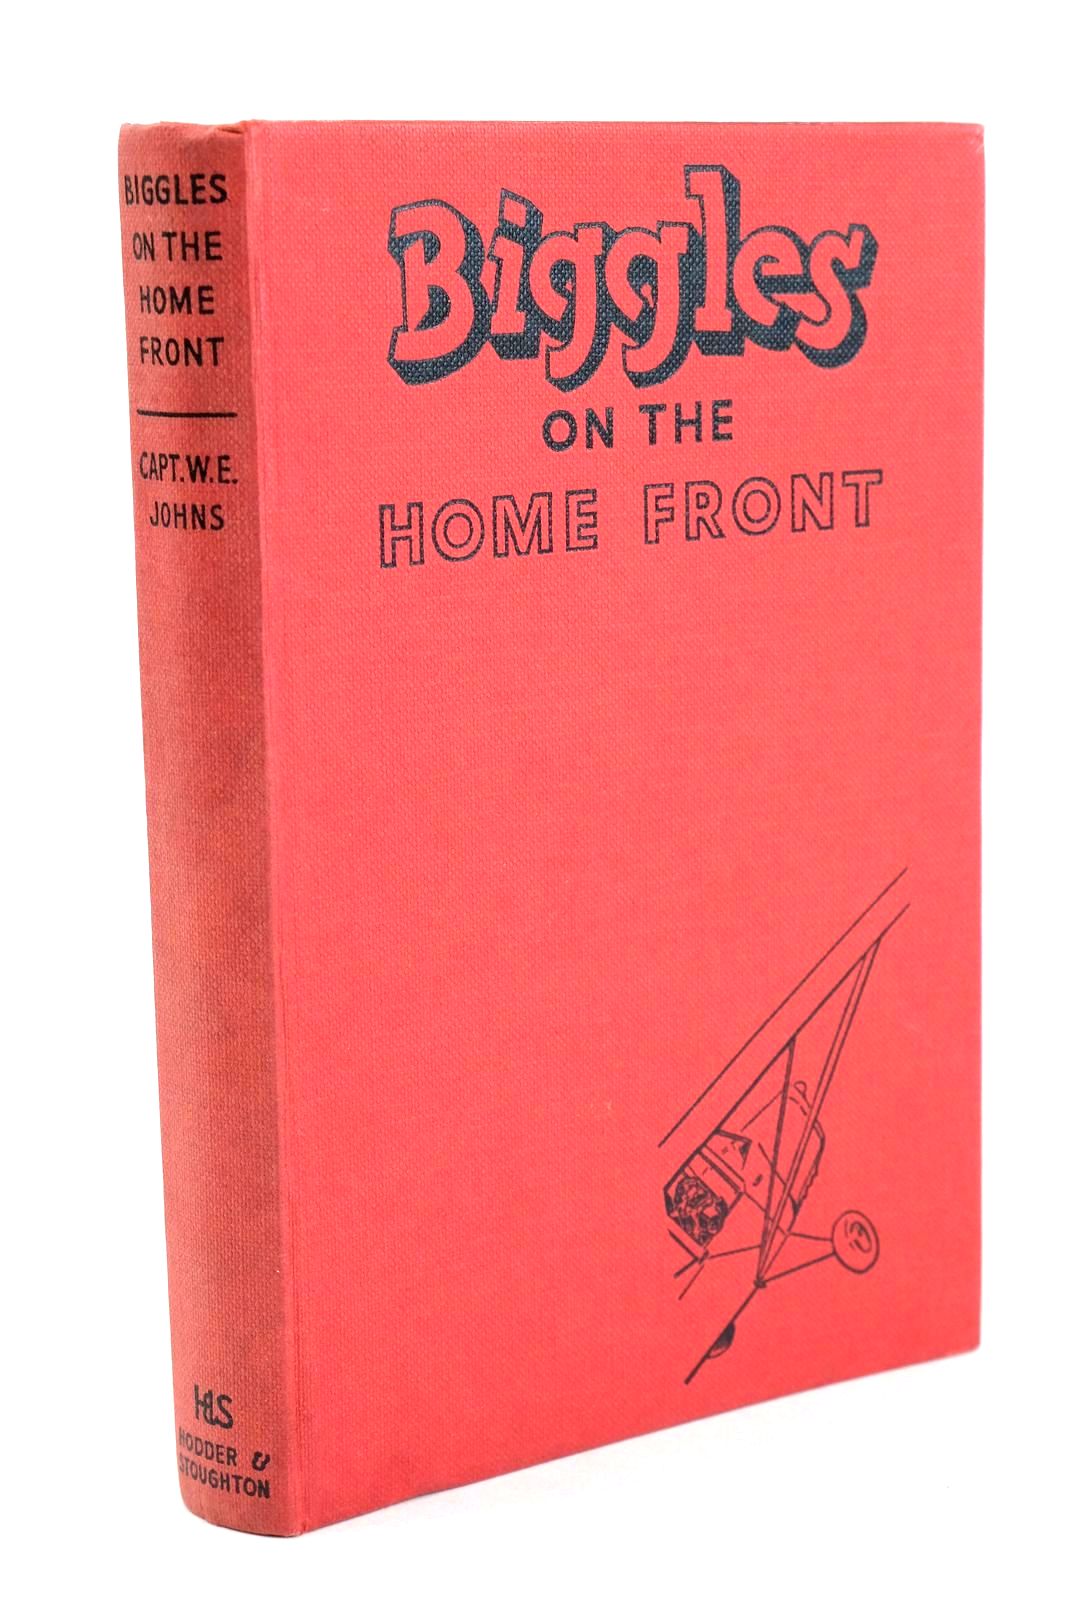 Photo of BIGGLES ON THE HOME FRONT written by Johns, W.E. illustrated by Stead,  published by Hodder & Stoughton (STOCK CODE: 1326194)  for sale by Stella & Rose's Books